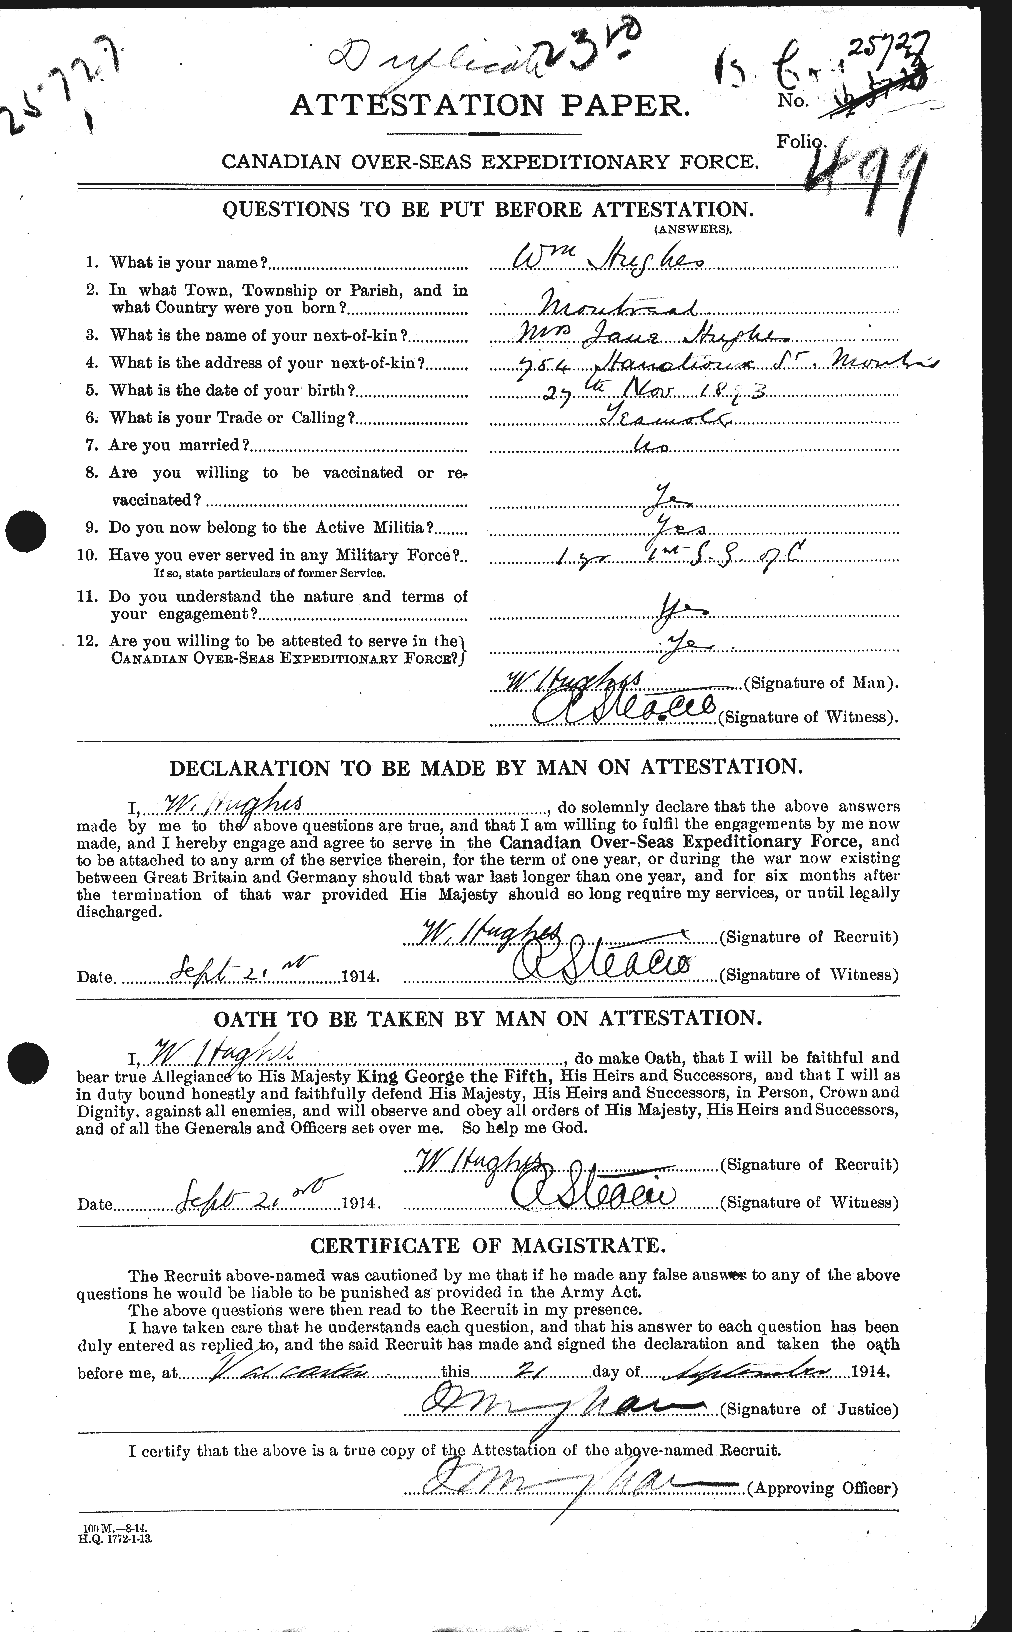 Personnel Records of the First World War - CEF 405876a